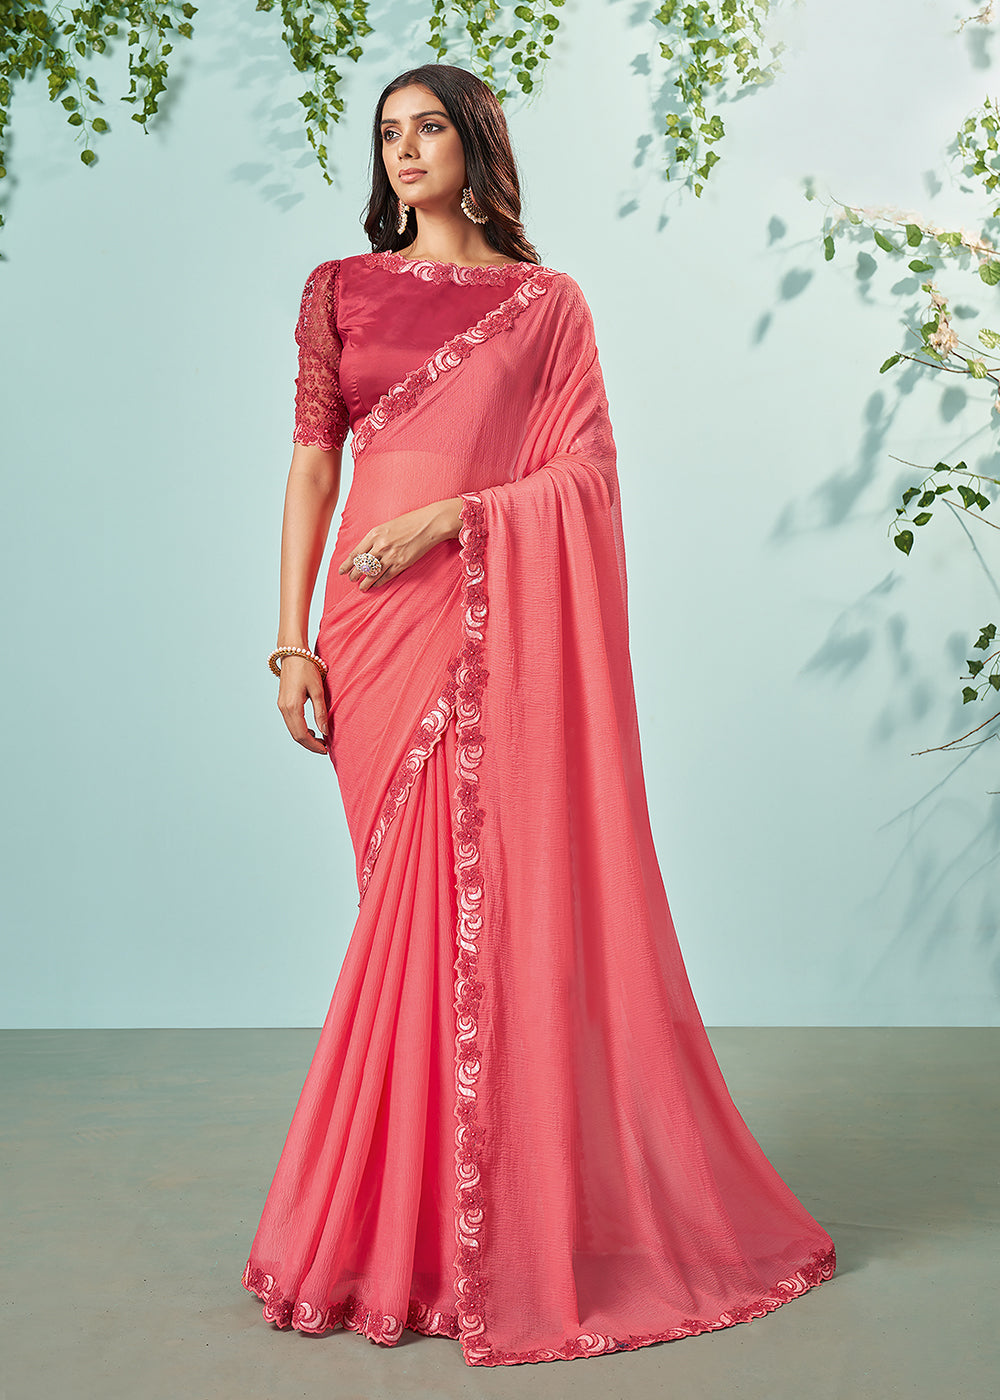 Buy Bridal Red Sarees in Australia & New Zealand